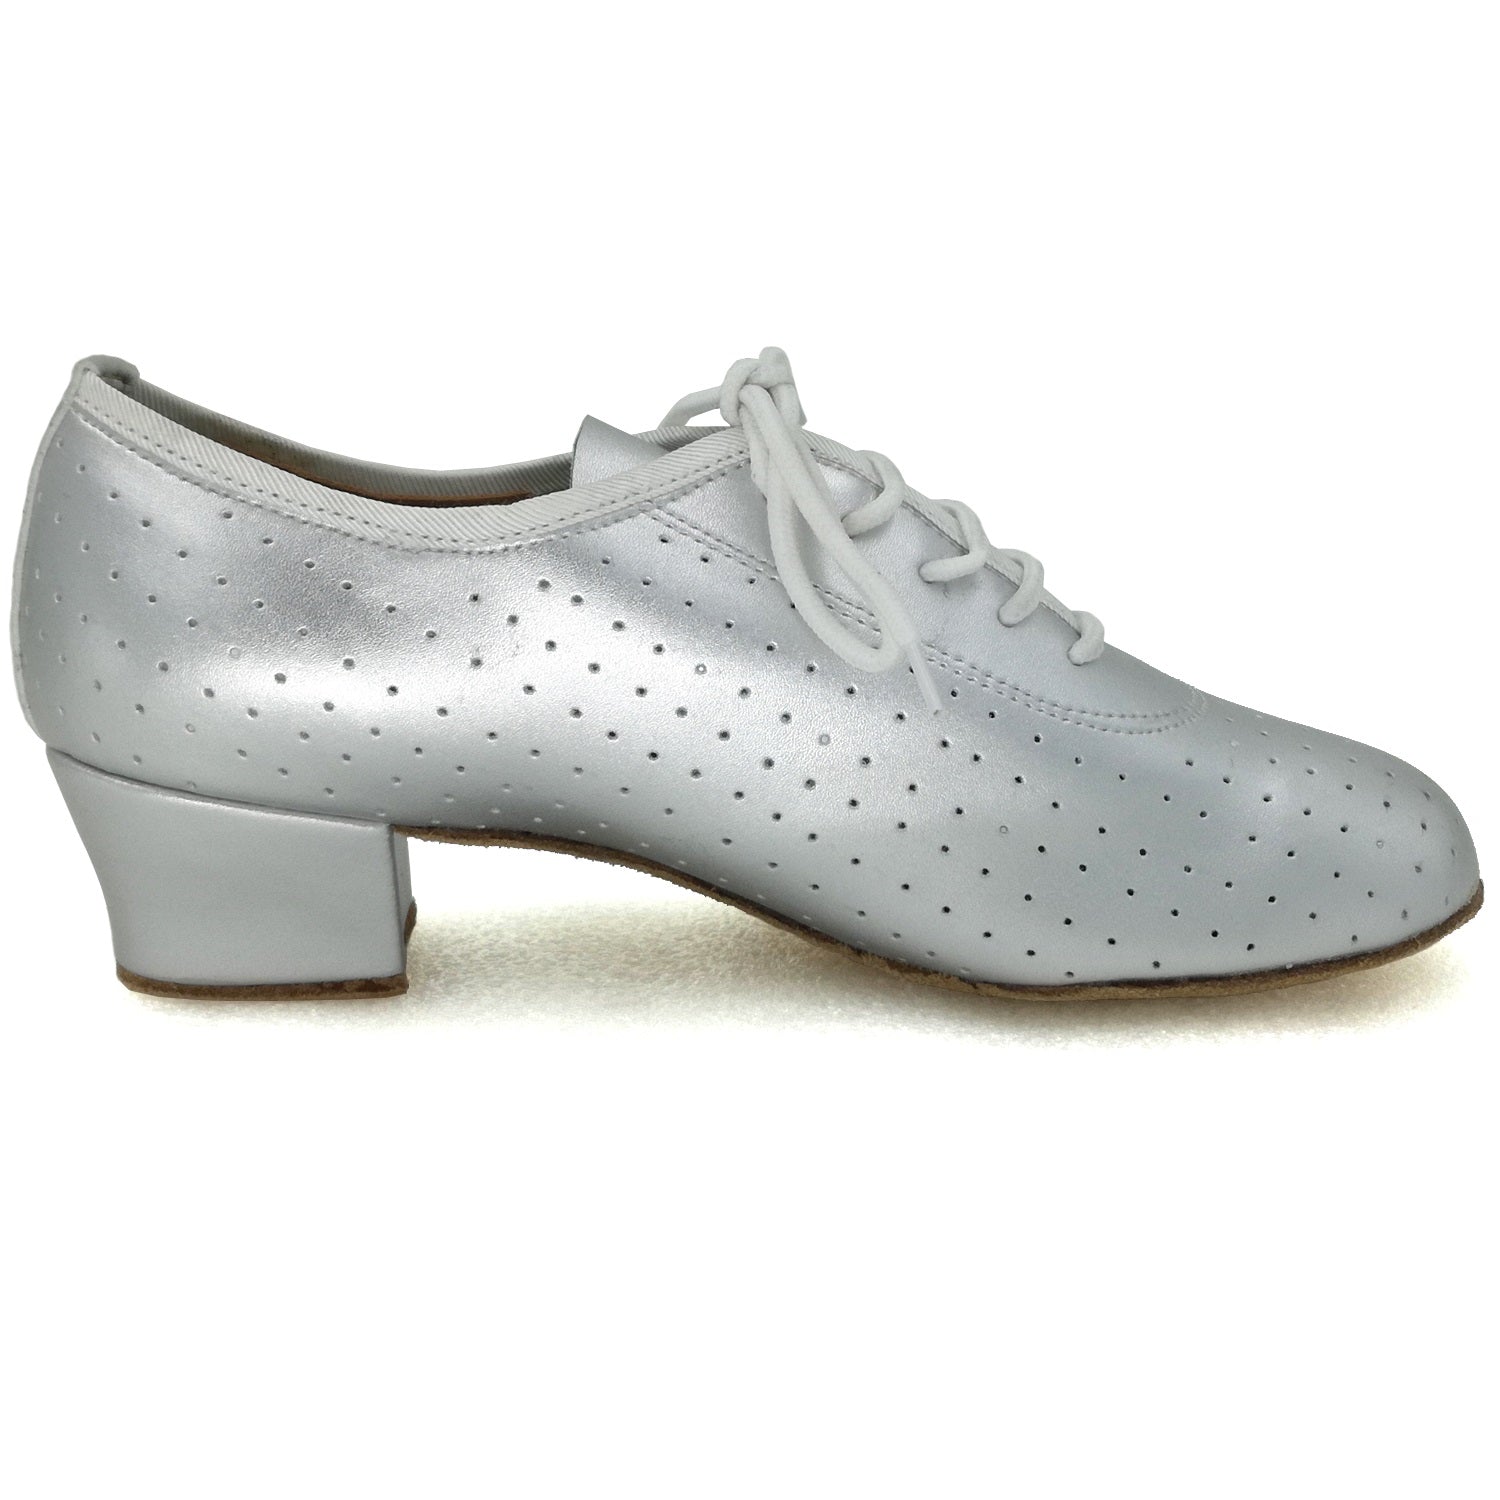 Women Ballroom Dancing Shoes with Suede Sole Lace-up Closed-toe in Silver for Tango Latin Practice (PD5002C)2